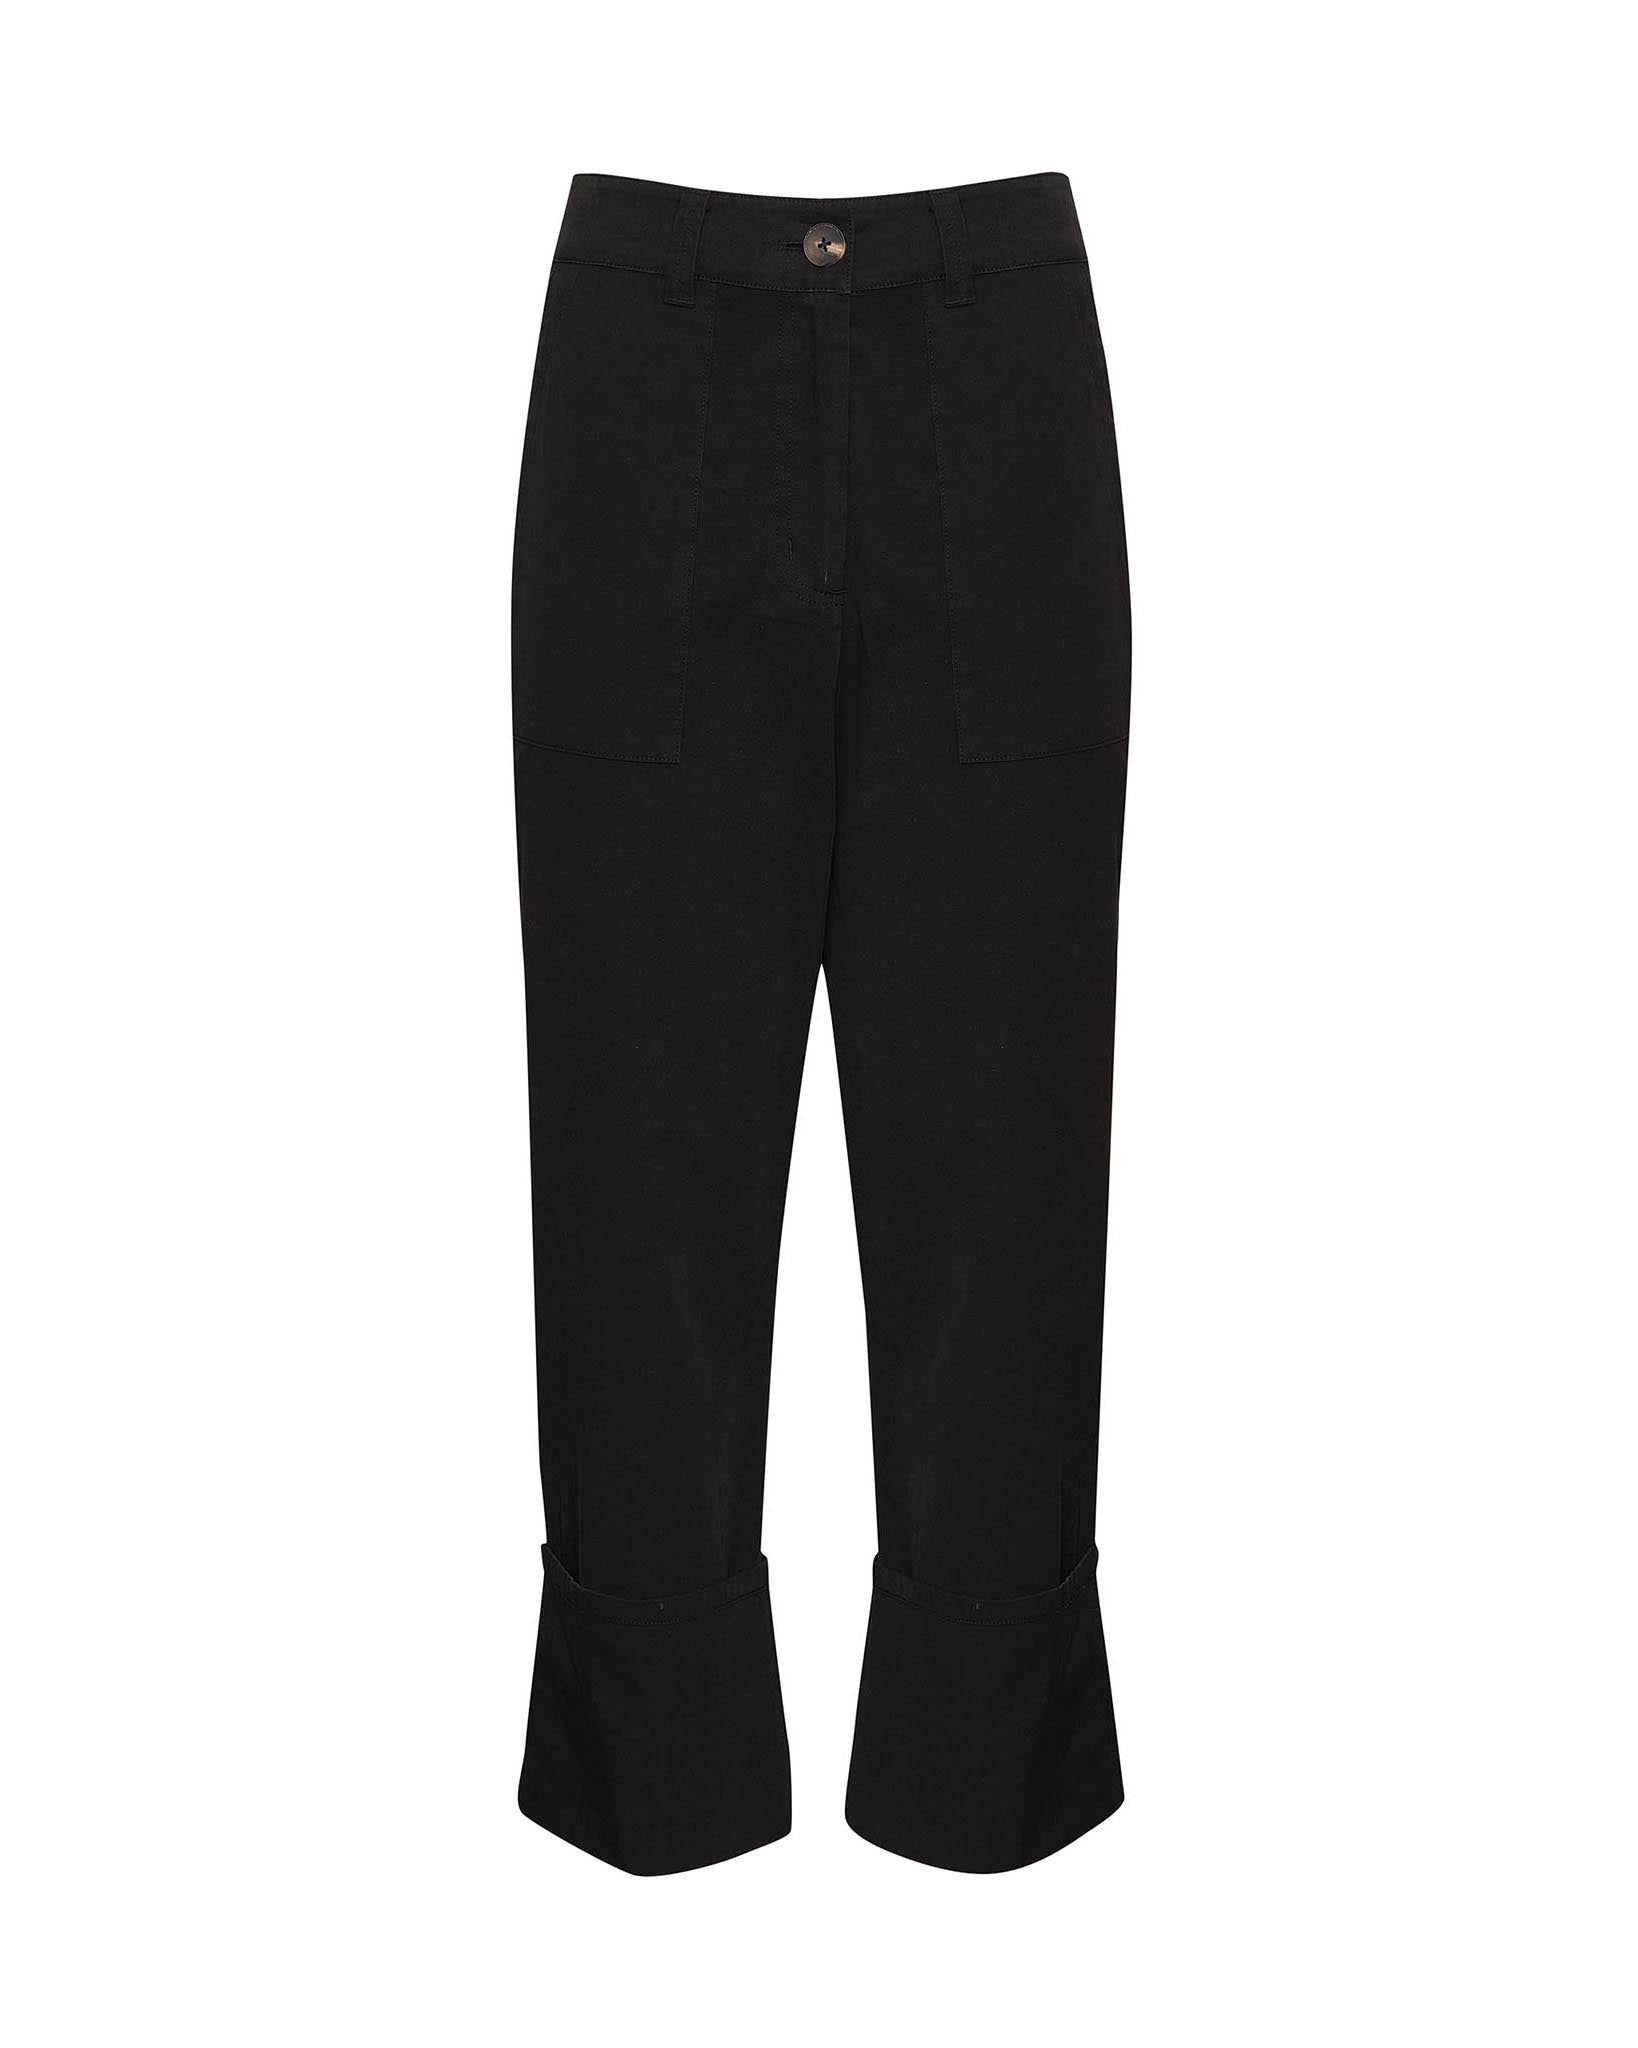 collective pant - black